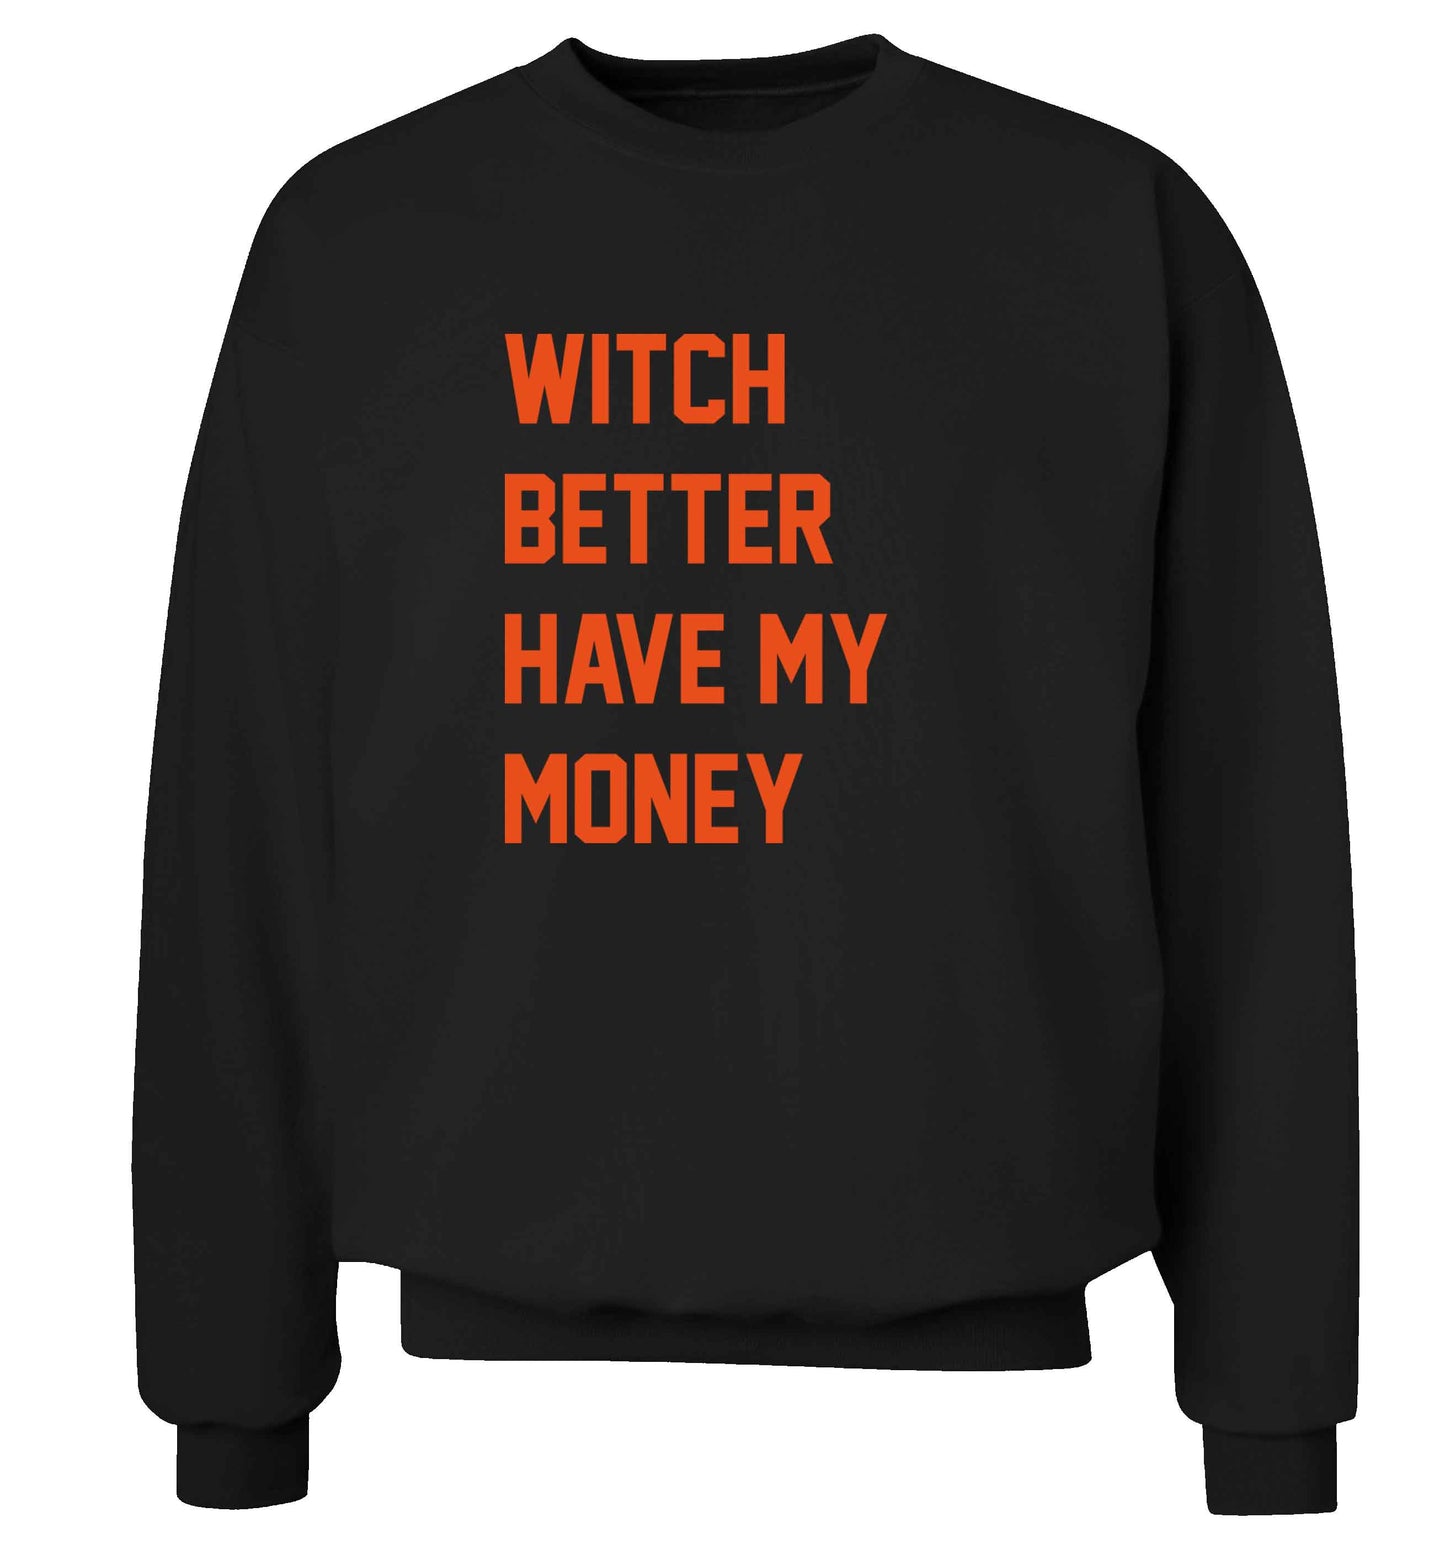 Witch better have my money adult's unisex black sweater 2XL